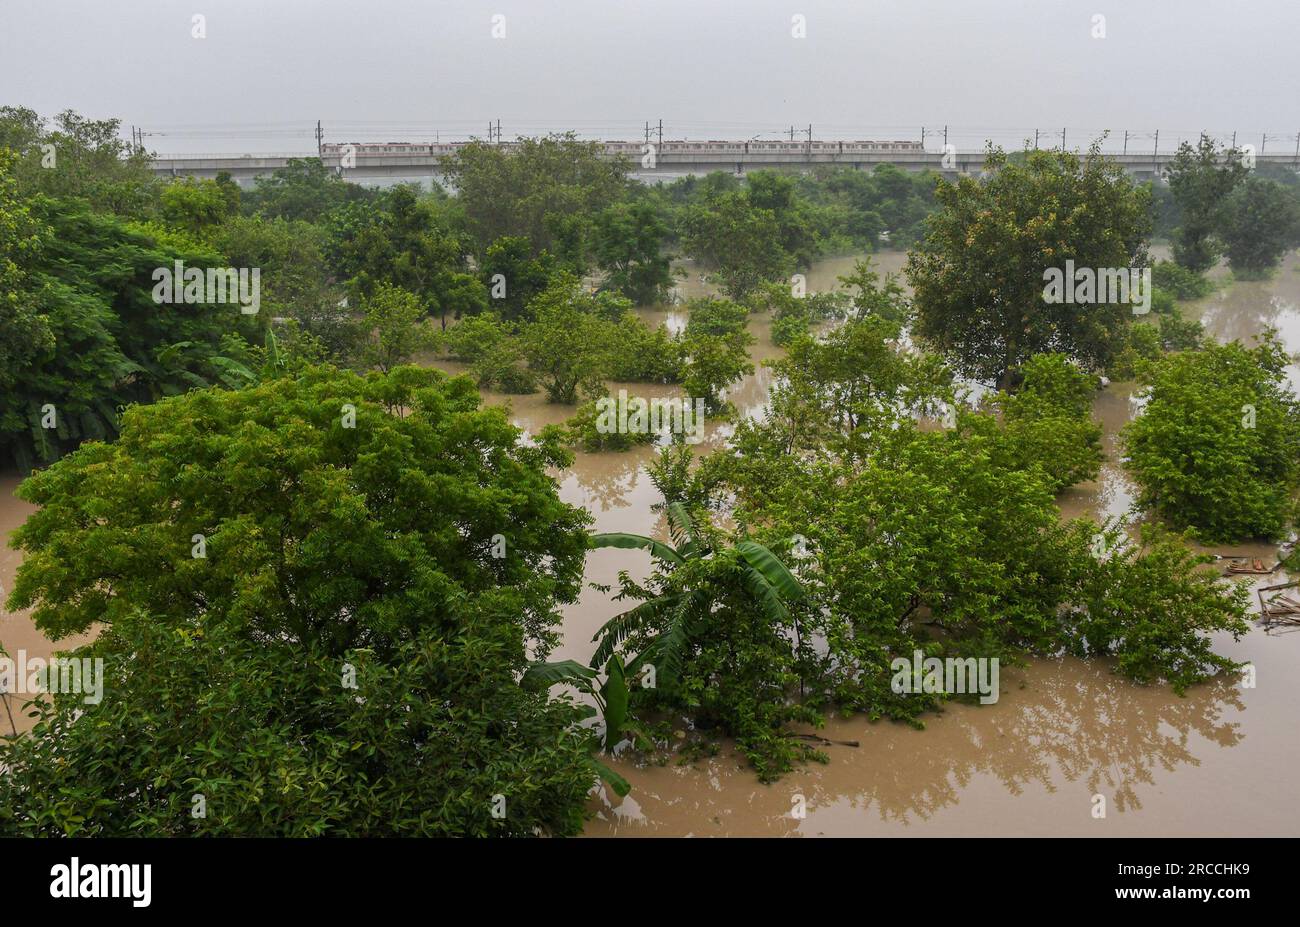 New Delhi, India. 12th July, 2023. General view of a low-lying area flooded by the rising water level of the Yamuna River after heavy monsoon rains in New Delhi. Yamuna water level in Delhi reaches all-time high of 207.55 meters. The government warned of flood-like conditions and asked residents of the riverbed and low-lying areas to evacuate their homes. Credit: SOPA Images Limited/Alamy Live News Stock Photo